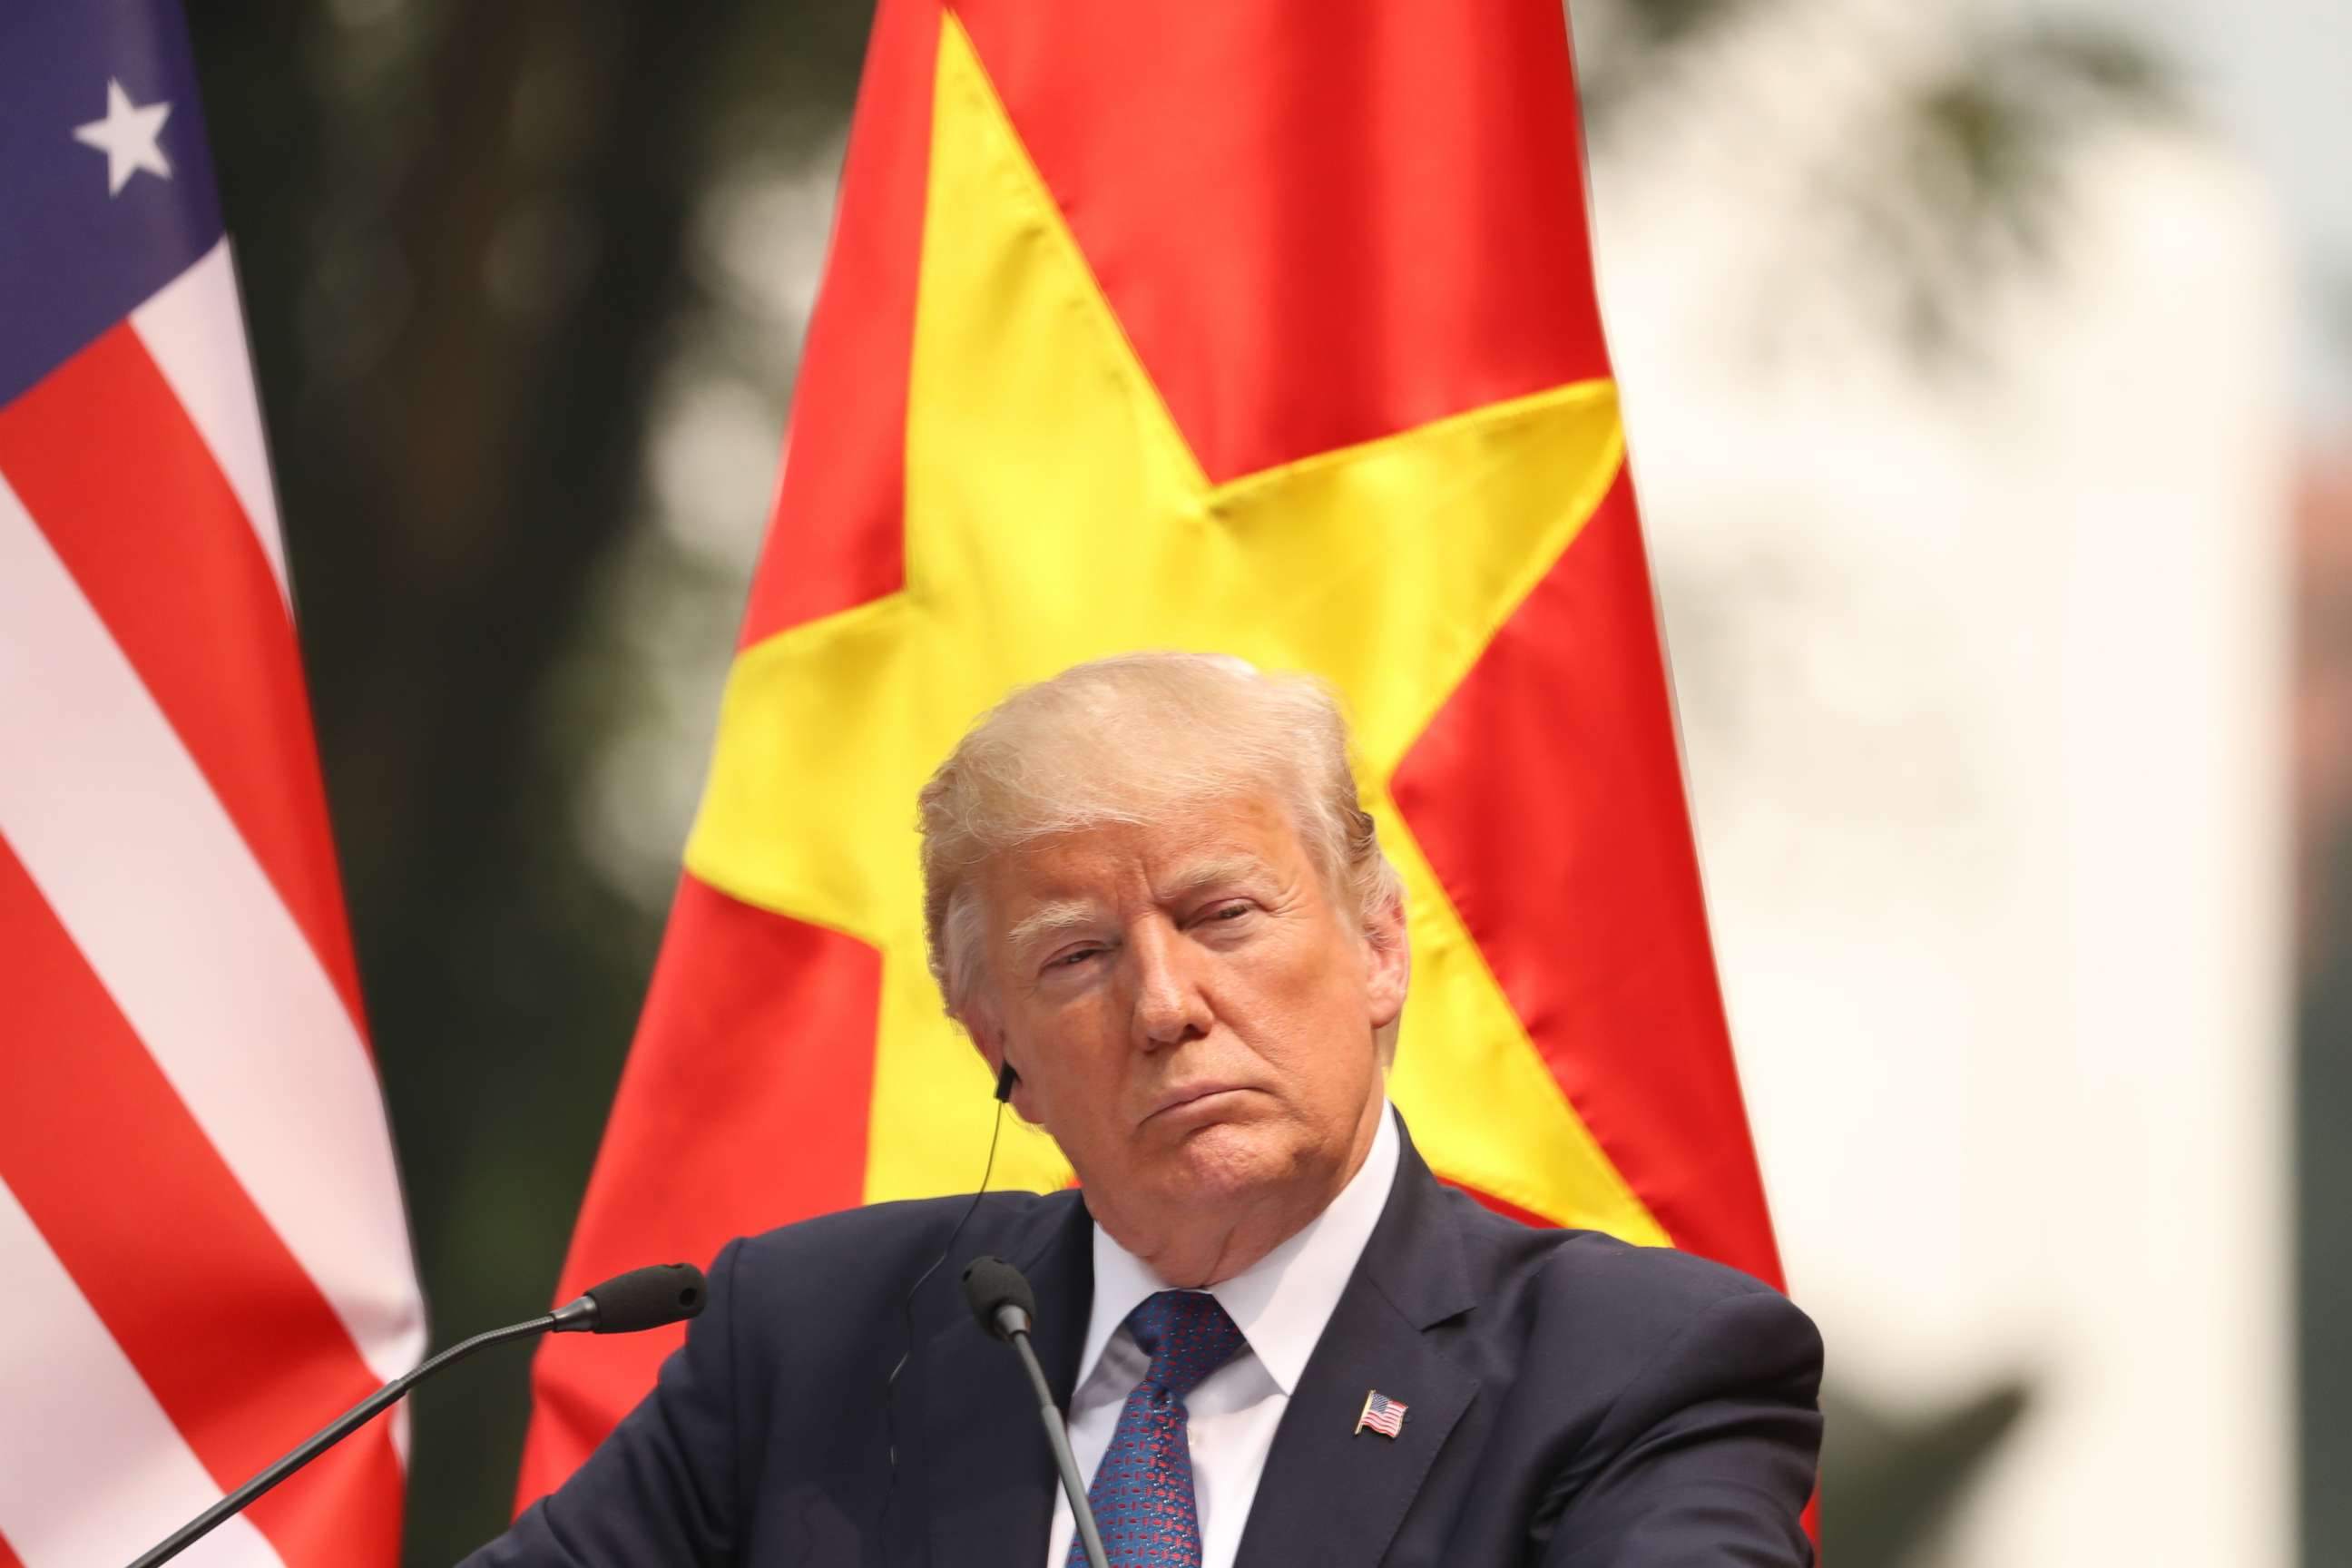 PHOTO: President Donald Trump speaks attends a news conference at the Presidential Palace, Sunday, Nov. 12, 2017, in Hanoi, Vietnam.